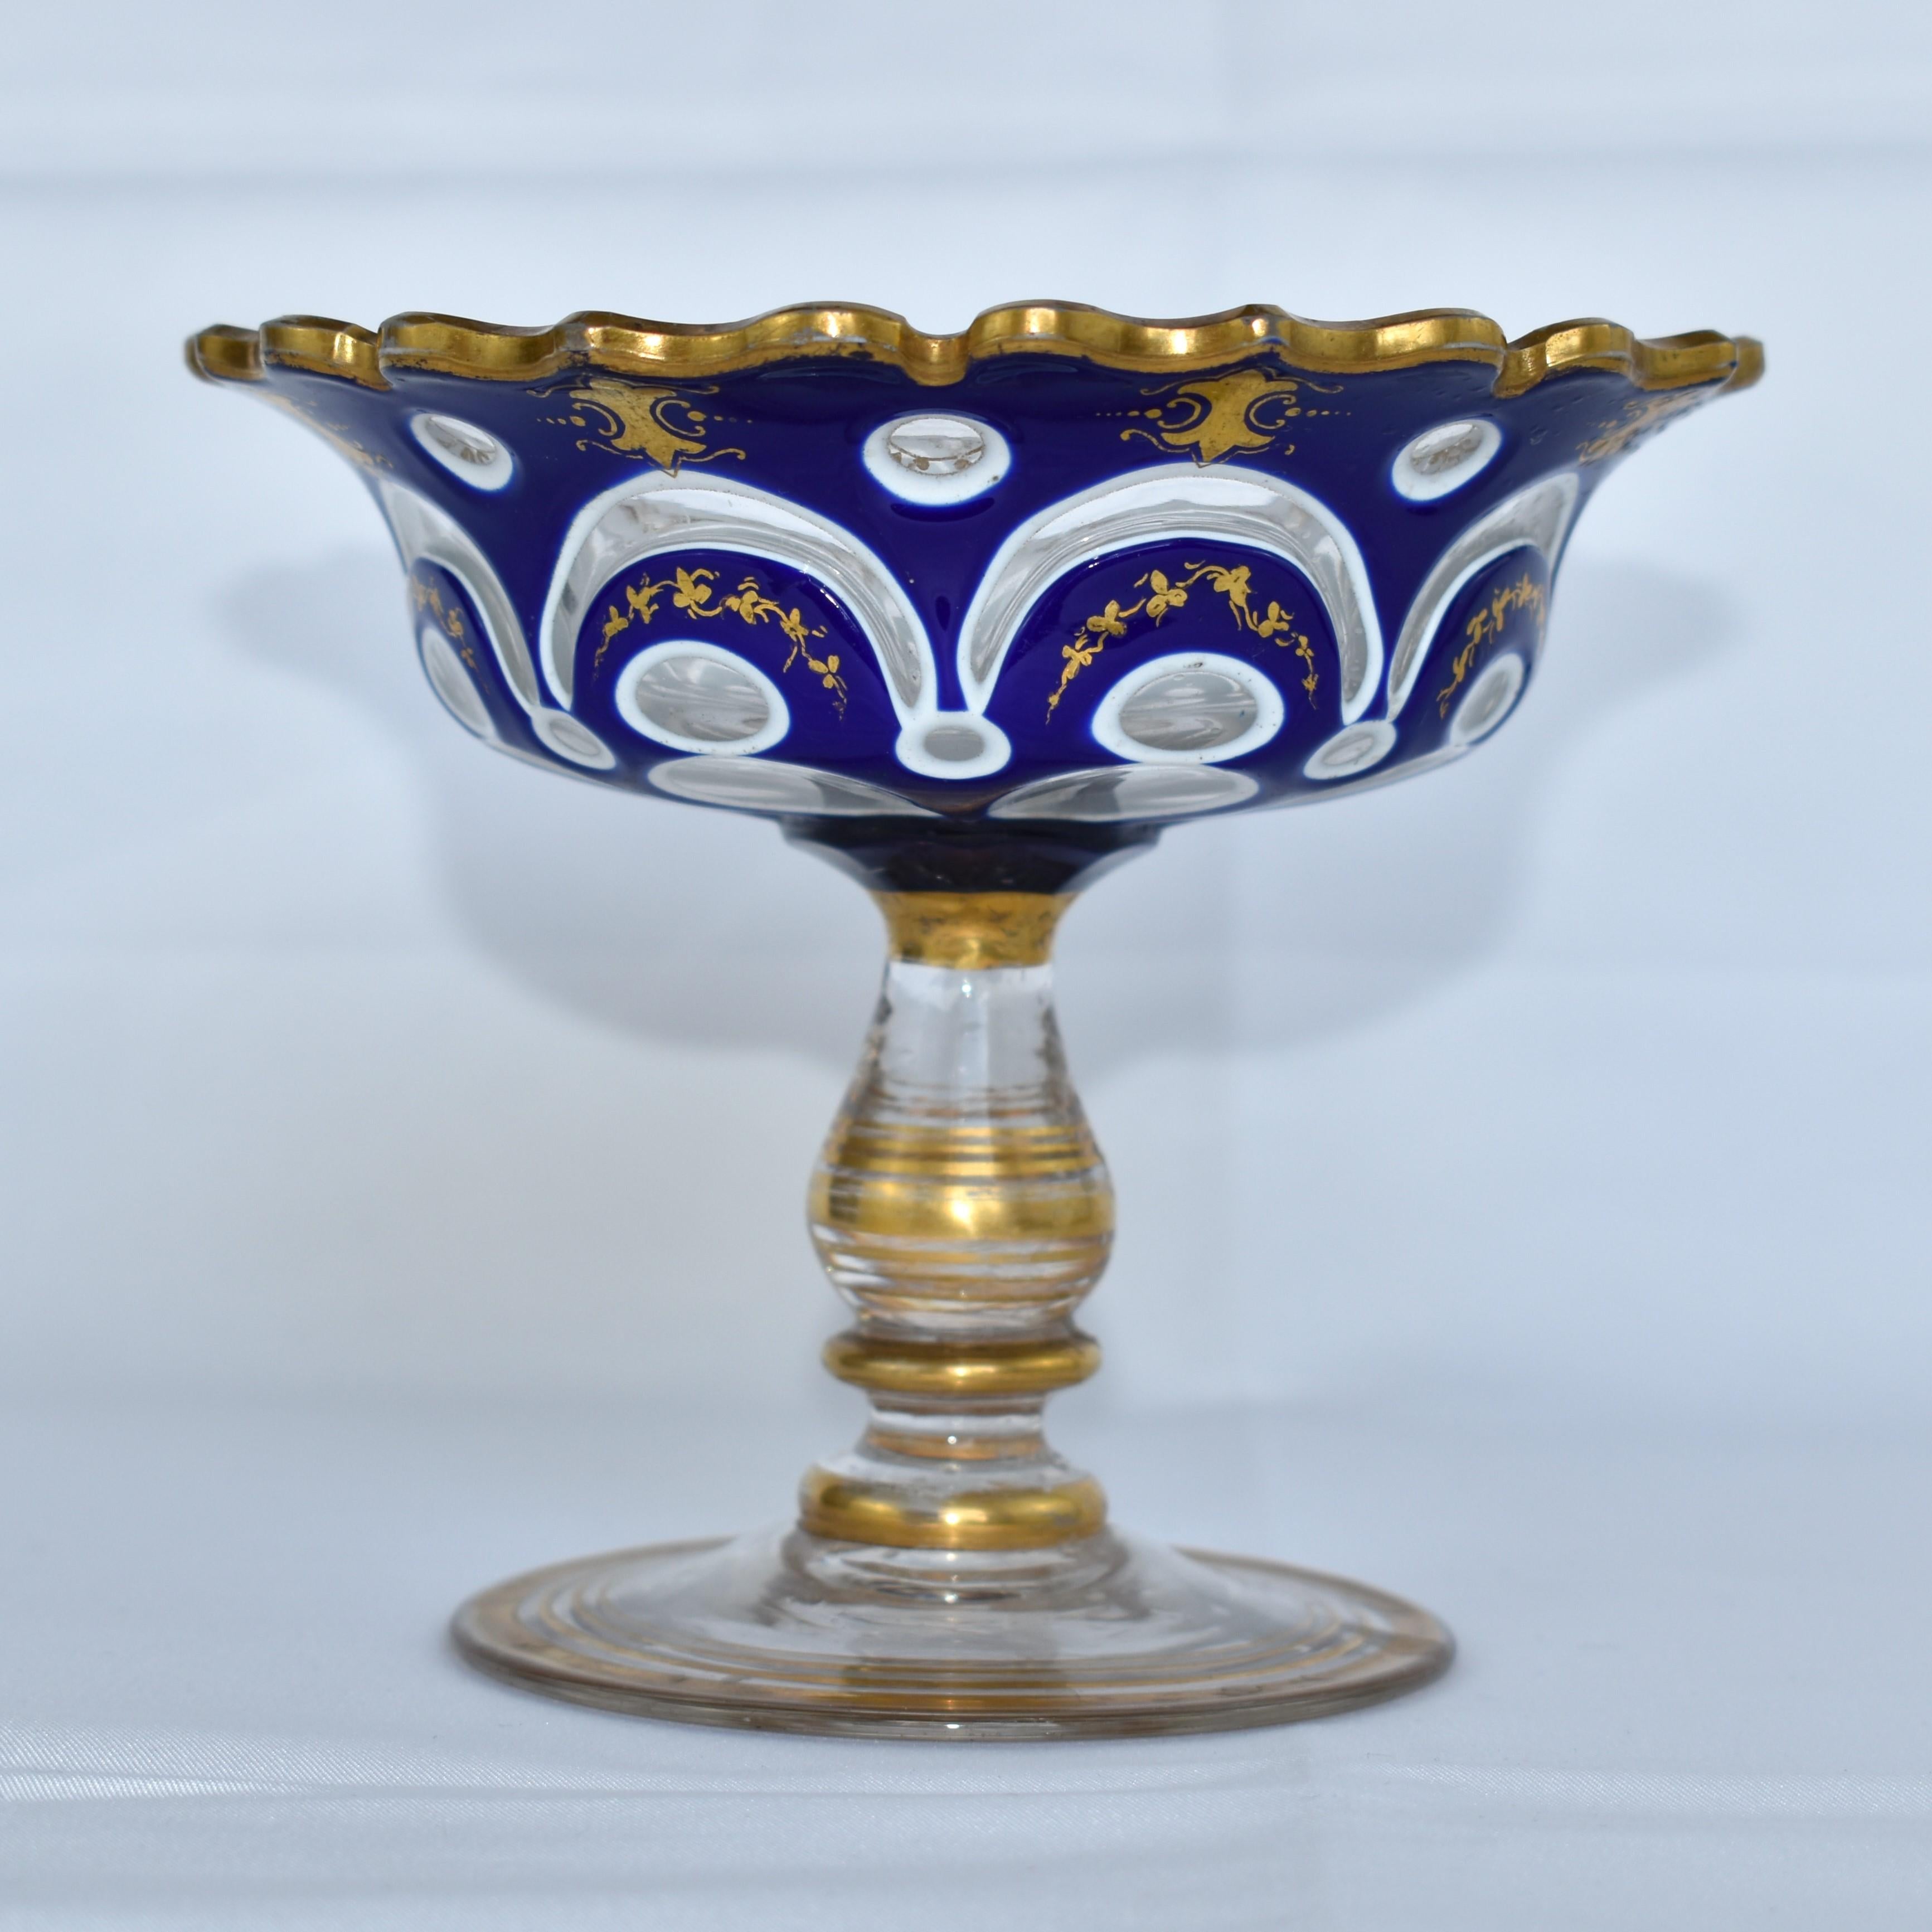 Stunning Serving Bowl, Centerpiece by Moser

Clear Crystal Double Overlaid with White and Cobalt Blue Opaline Glass

Stunning Wavy Gilded Rim

Gilded Enamel Decoration and Gilding Highlights all around

Bohemia, circa 1880.